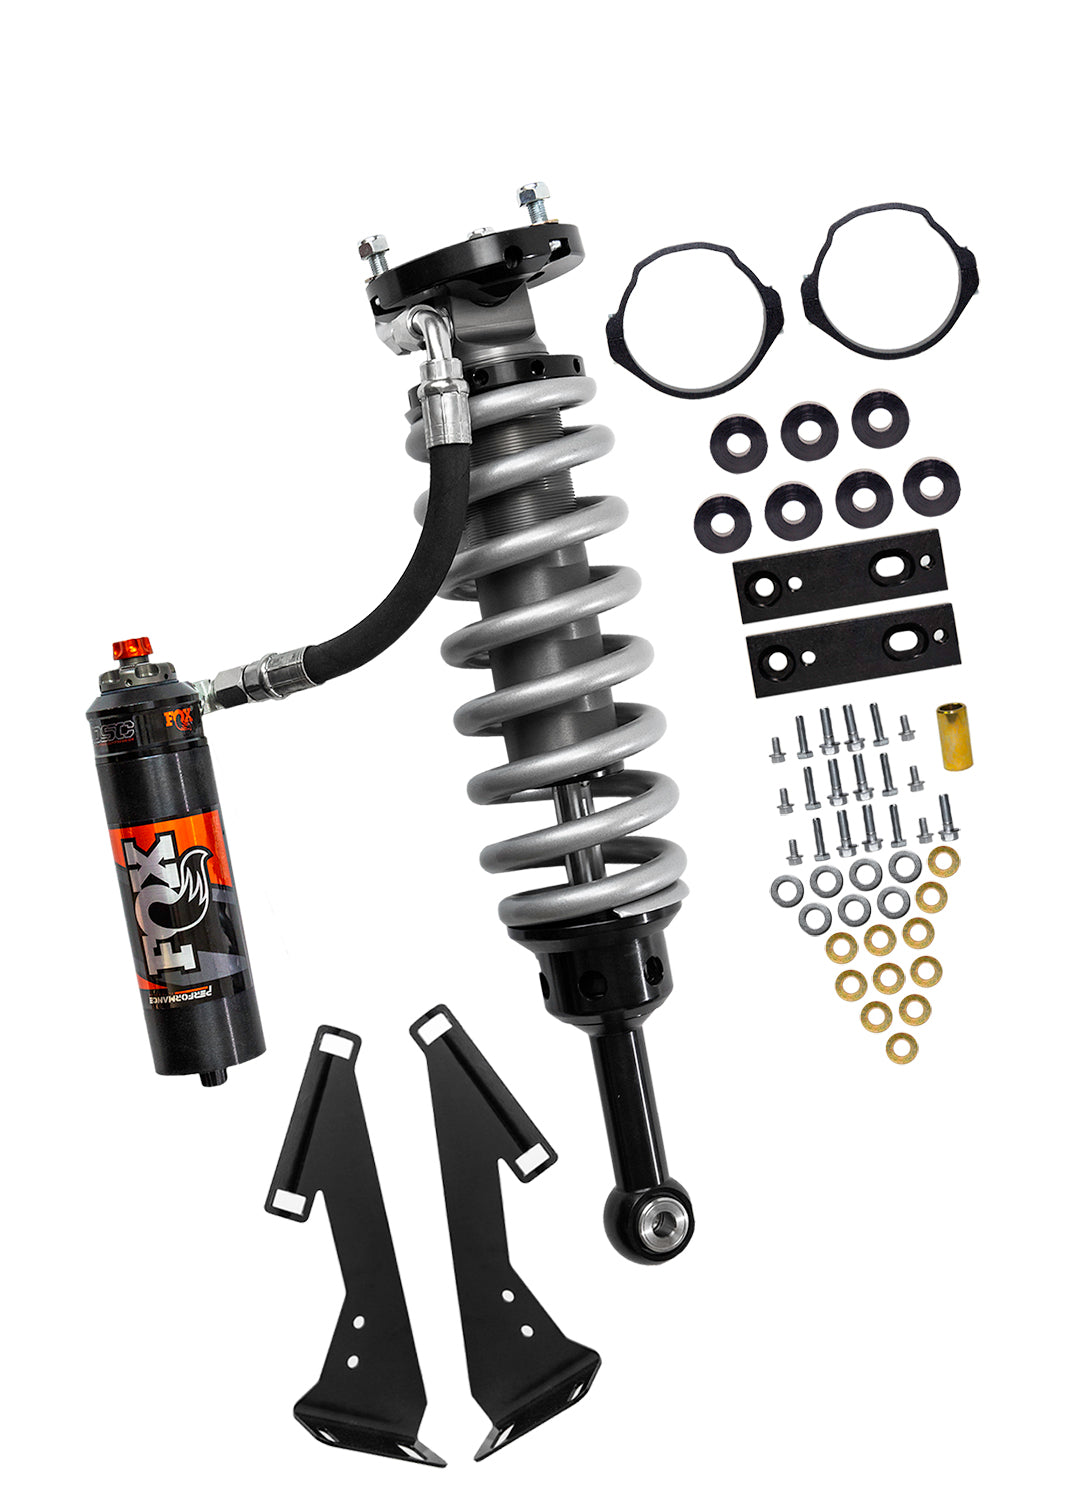 '05-23 Toyota Tacoma Fox Performance Elite Series RR 2.5 Front Coilovers parts